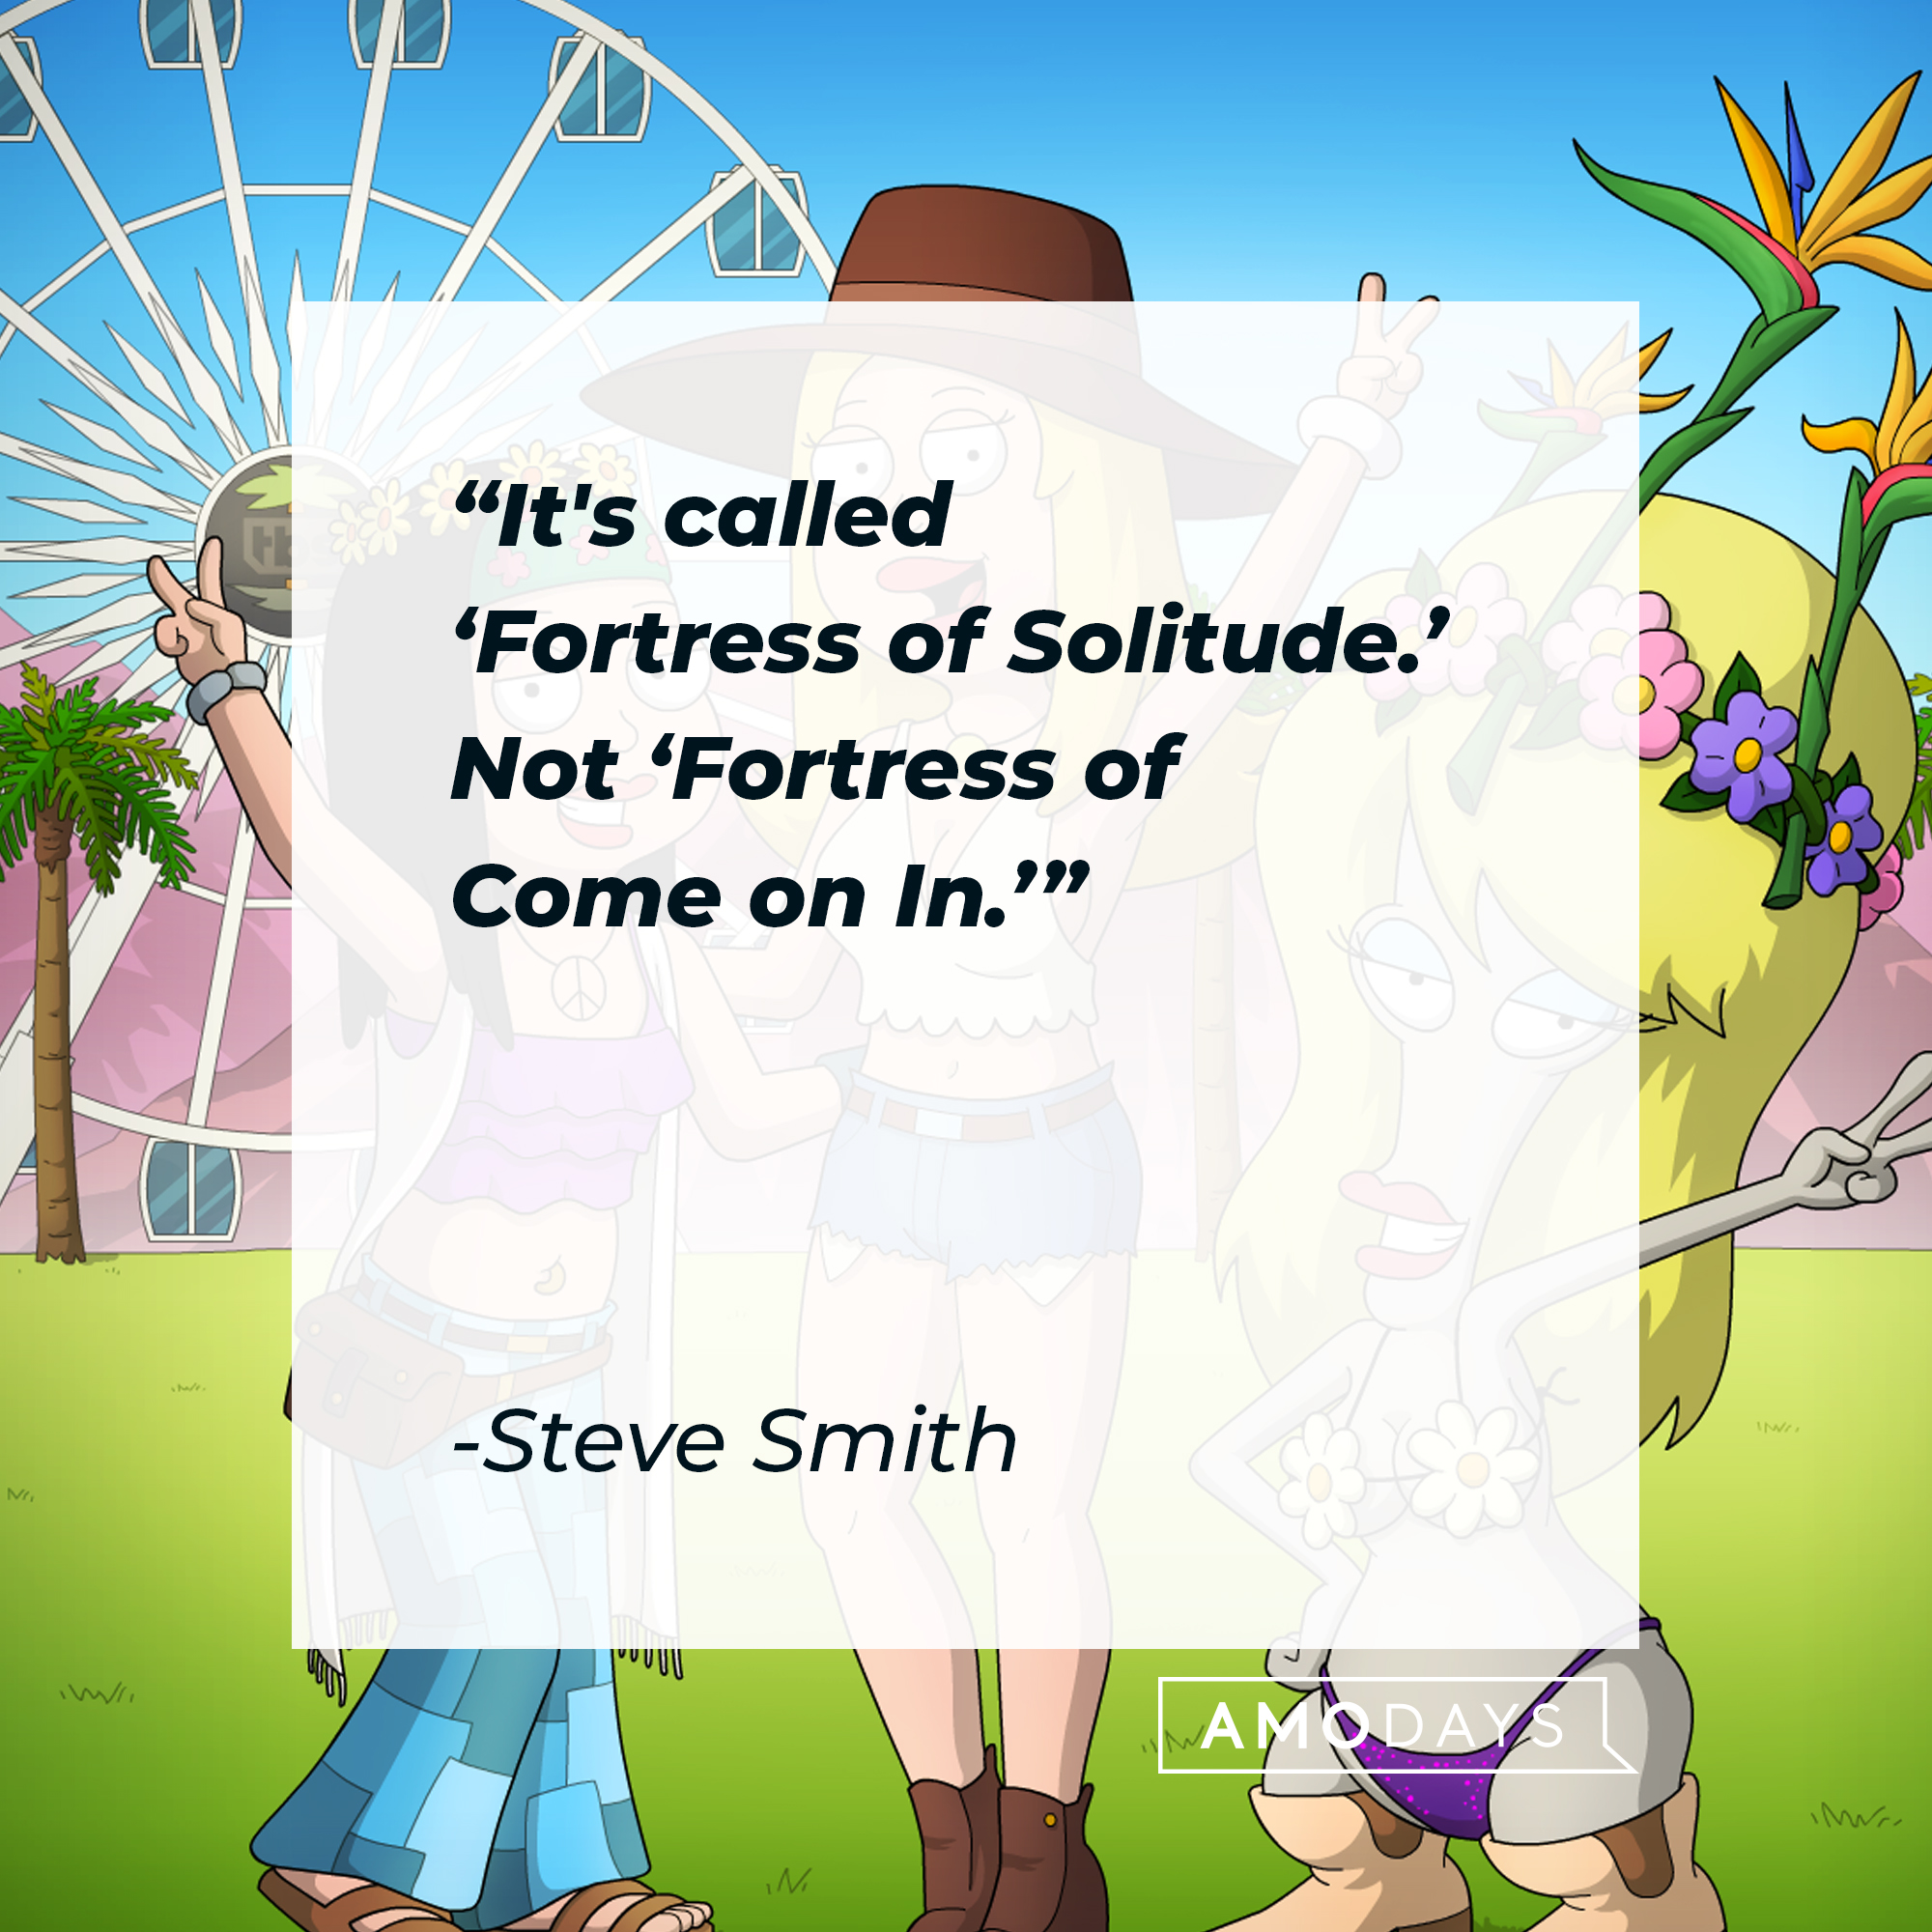 Steve Smith's quote: "It's called 'Fortress of Solitude.' Not 'Fortress of Come on In.'" | Source: facebook.com/AmericanDad